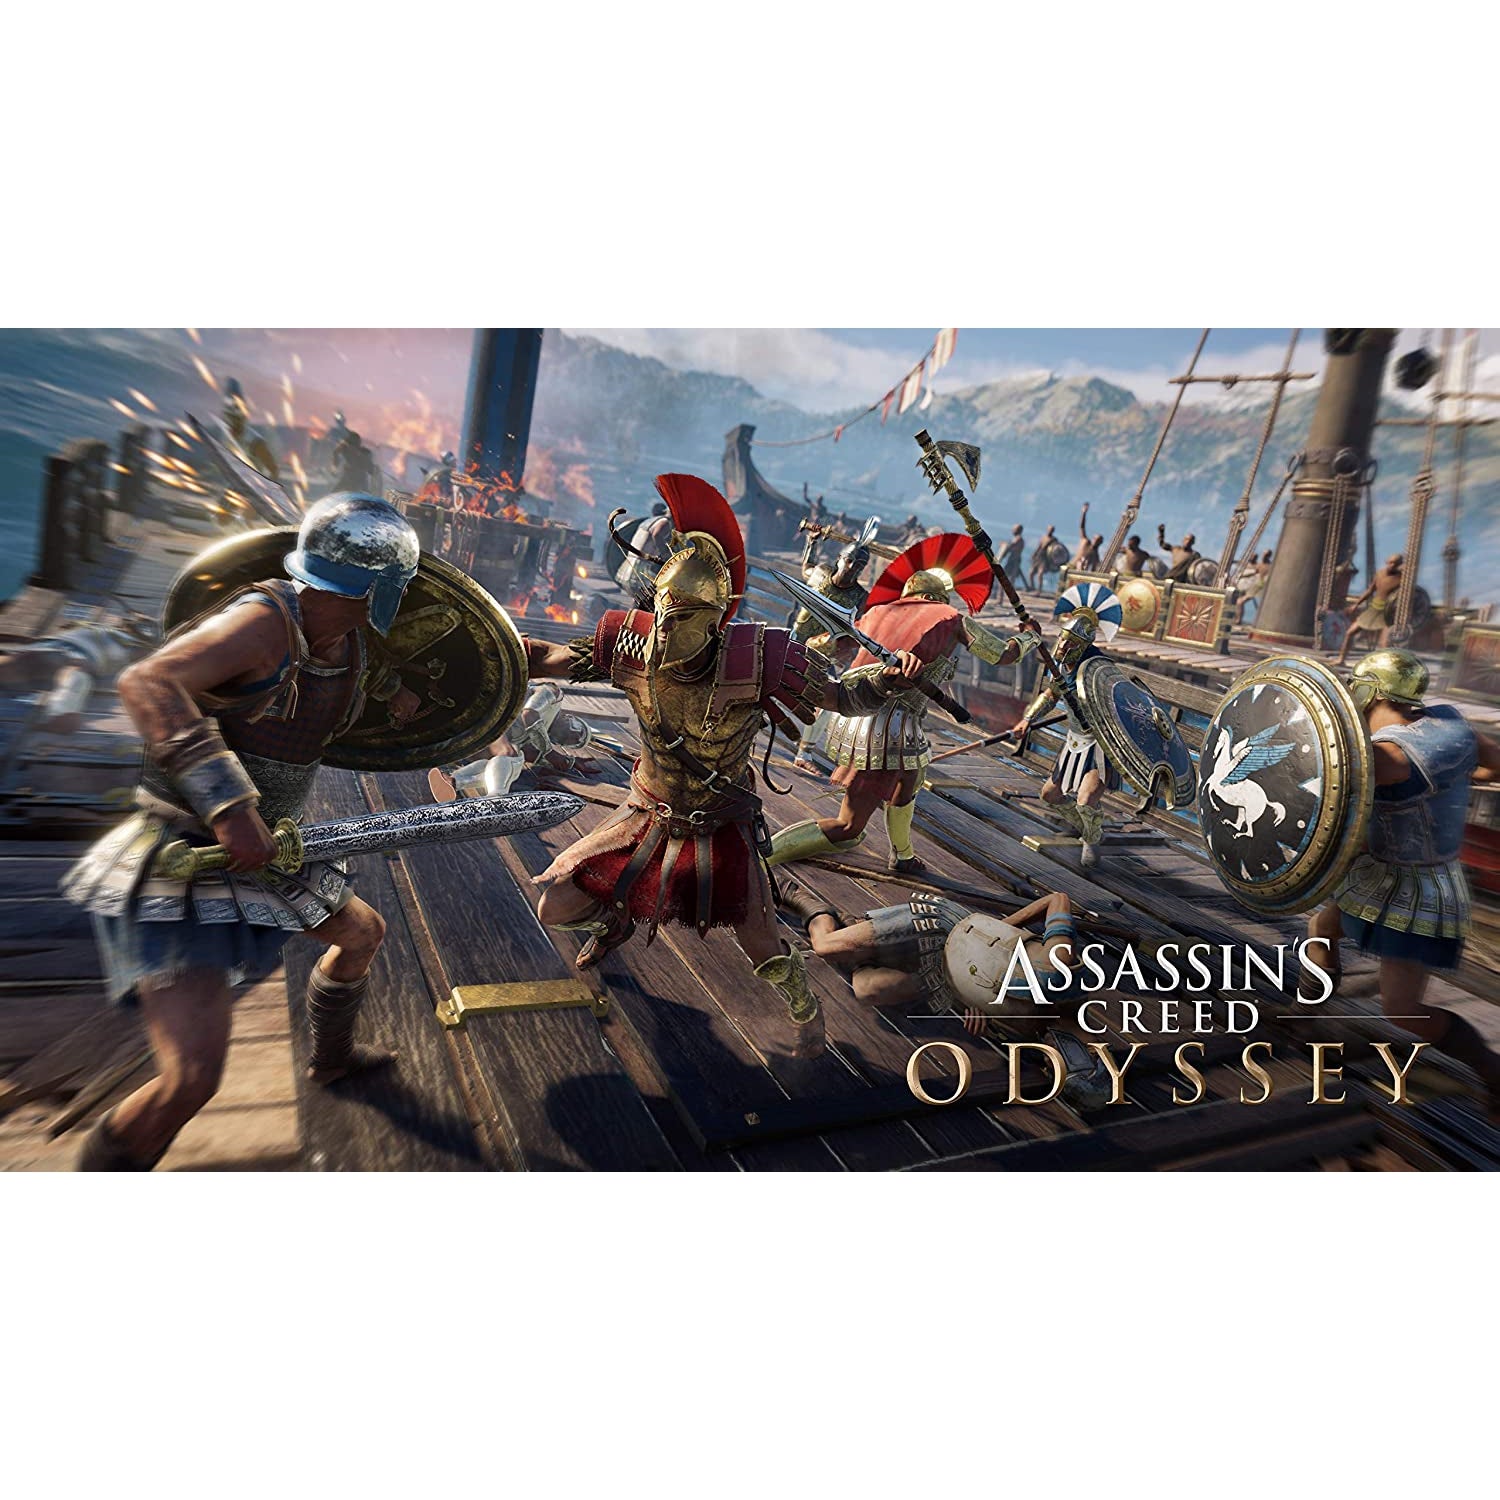 Assassin's Creed Origins + Assassin's Creed Odyssey - PS4